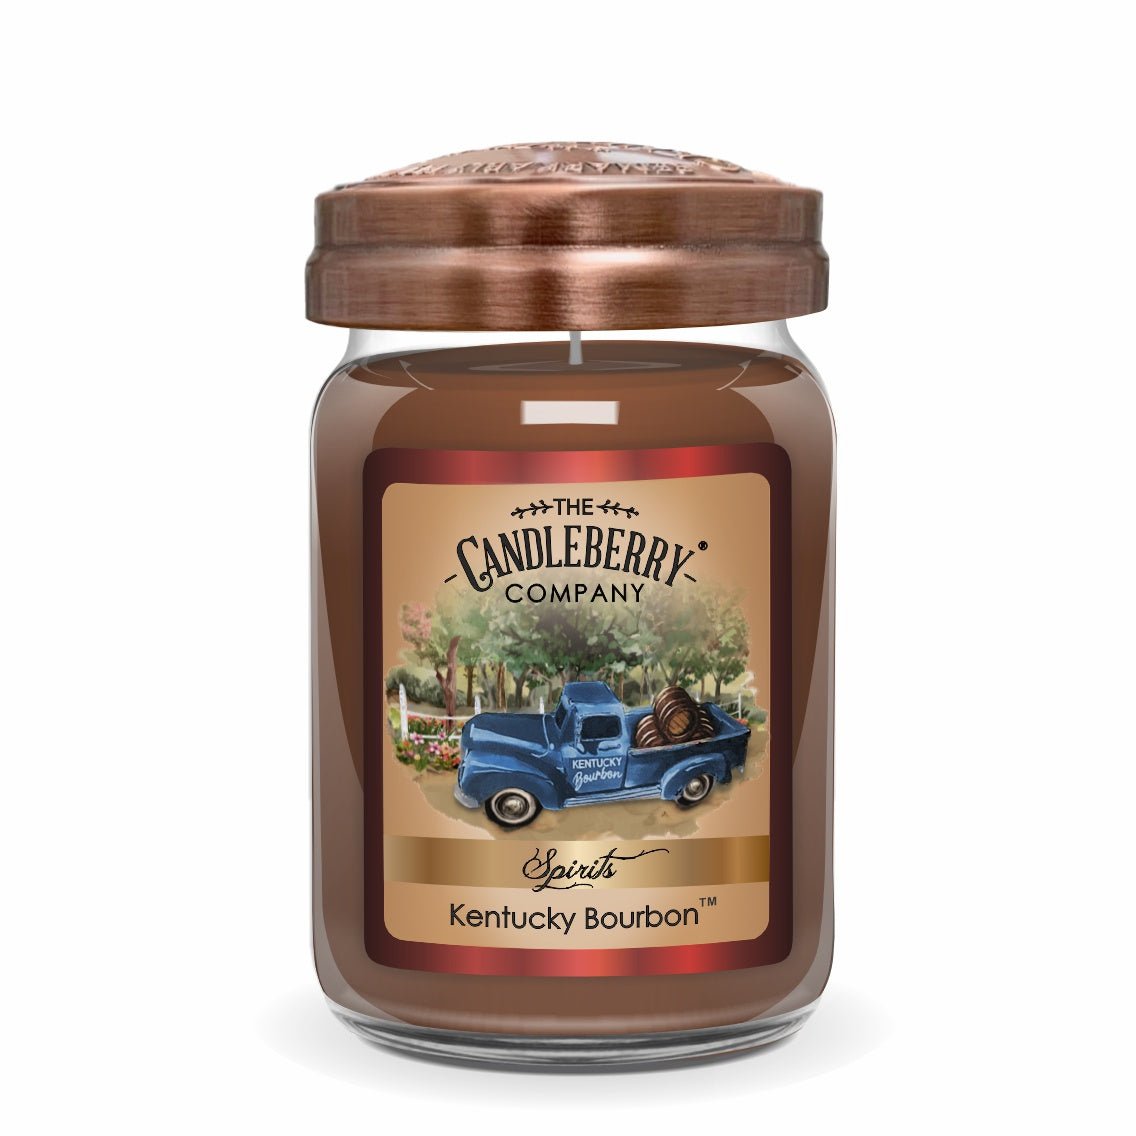 KENTUCKY BOURBON soy coconut premium scented candle powerful strong fragrance natural fills house best seller vegan